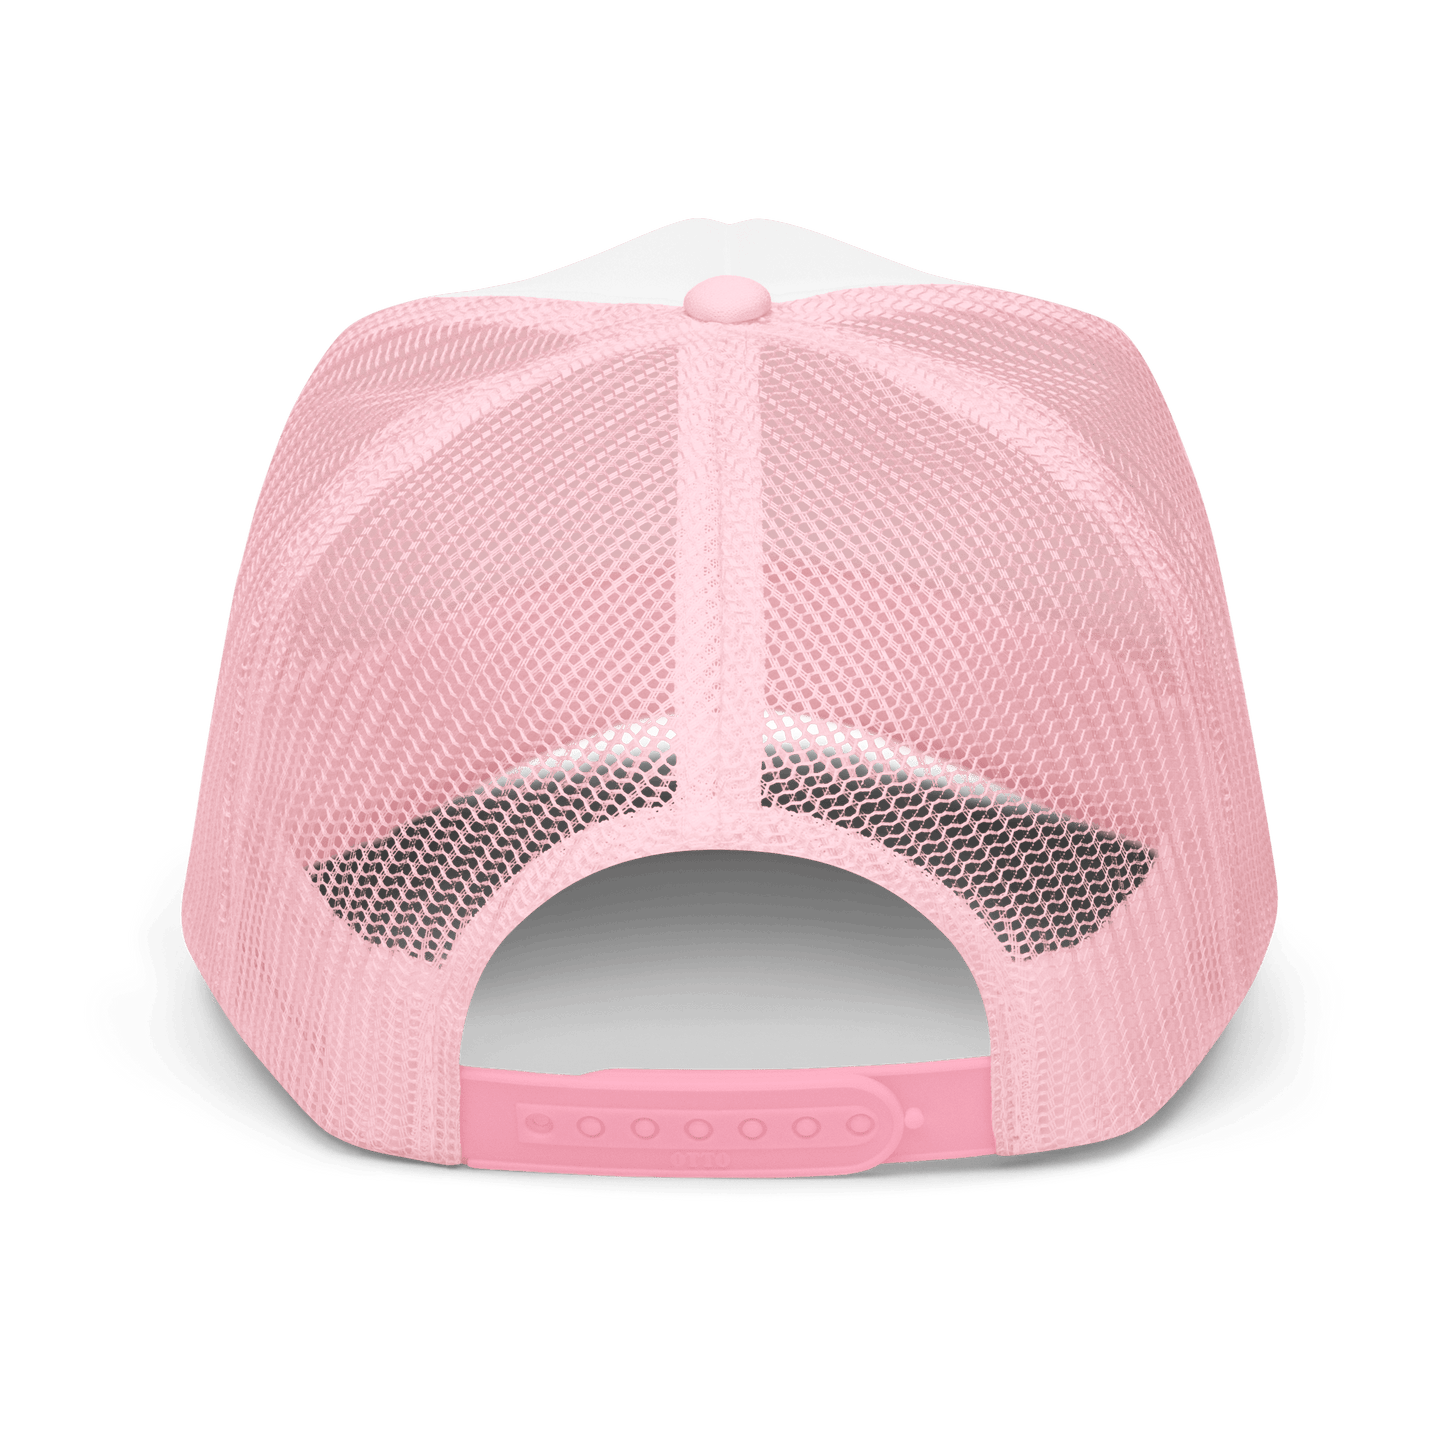 See you Next Tuesday Pink & Black Trucker - James Kennedy Merch